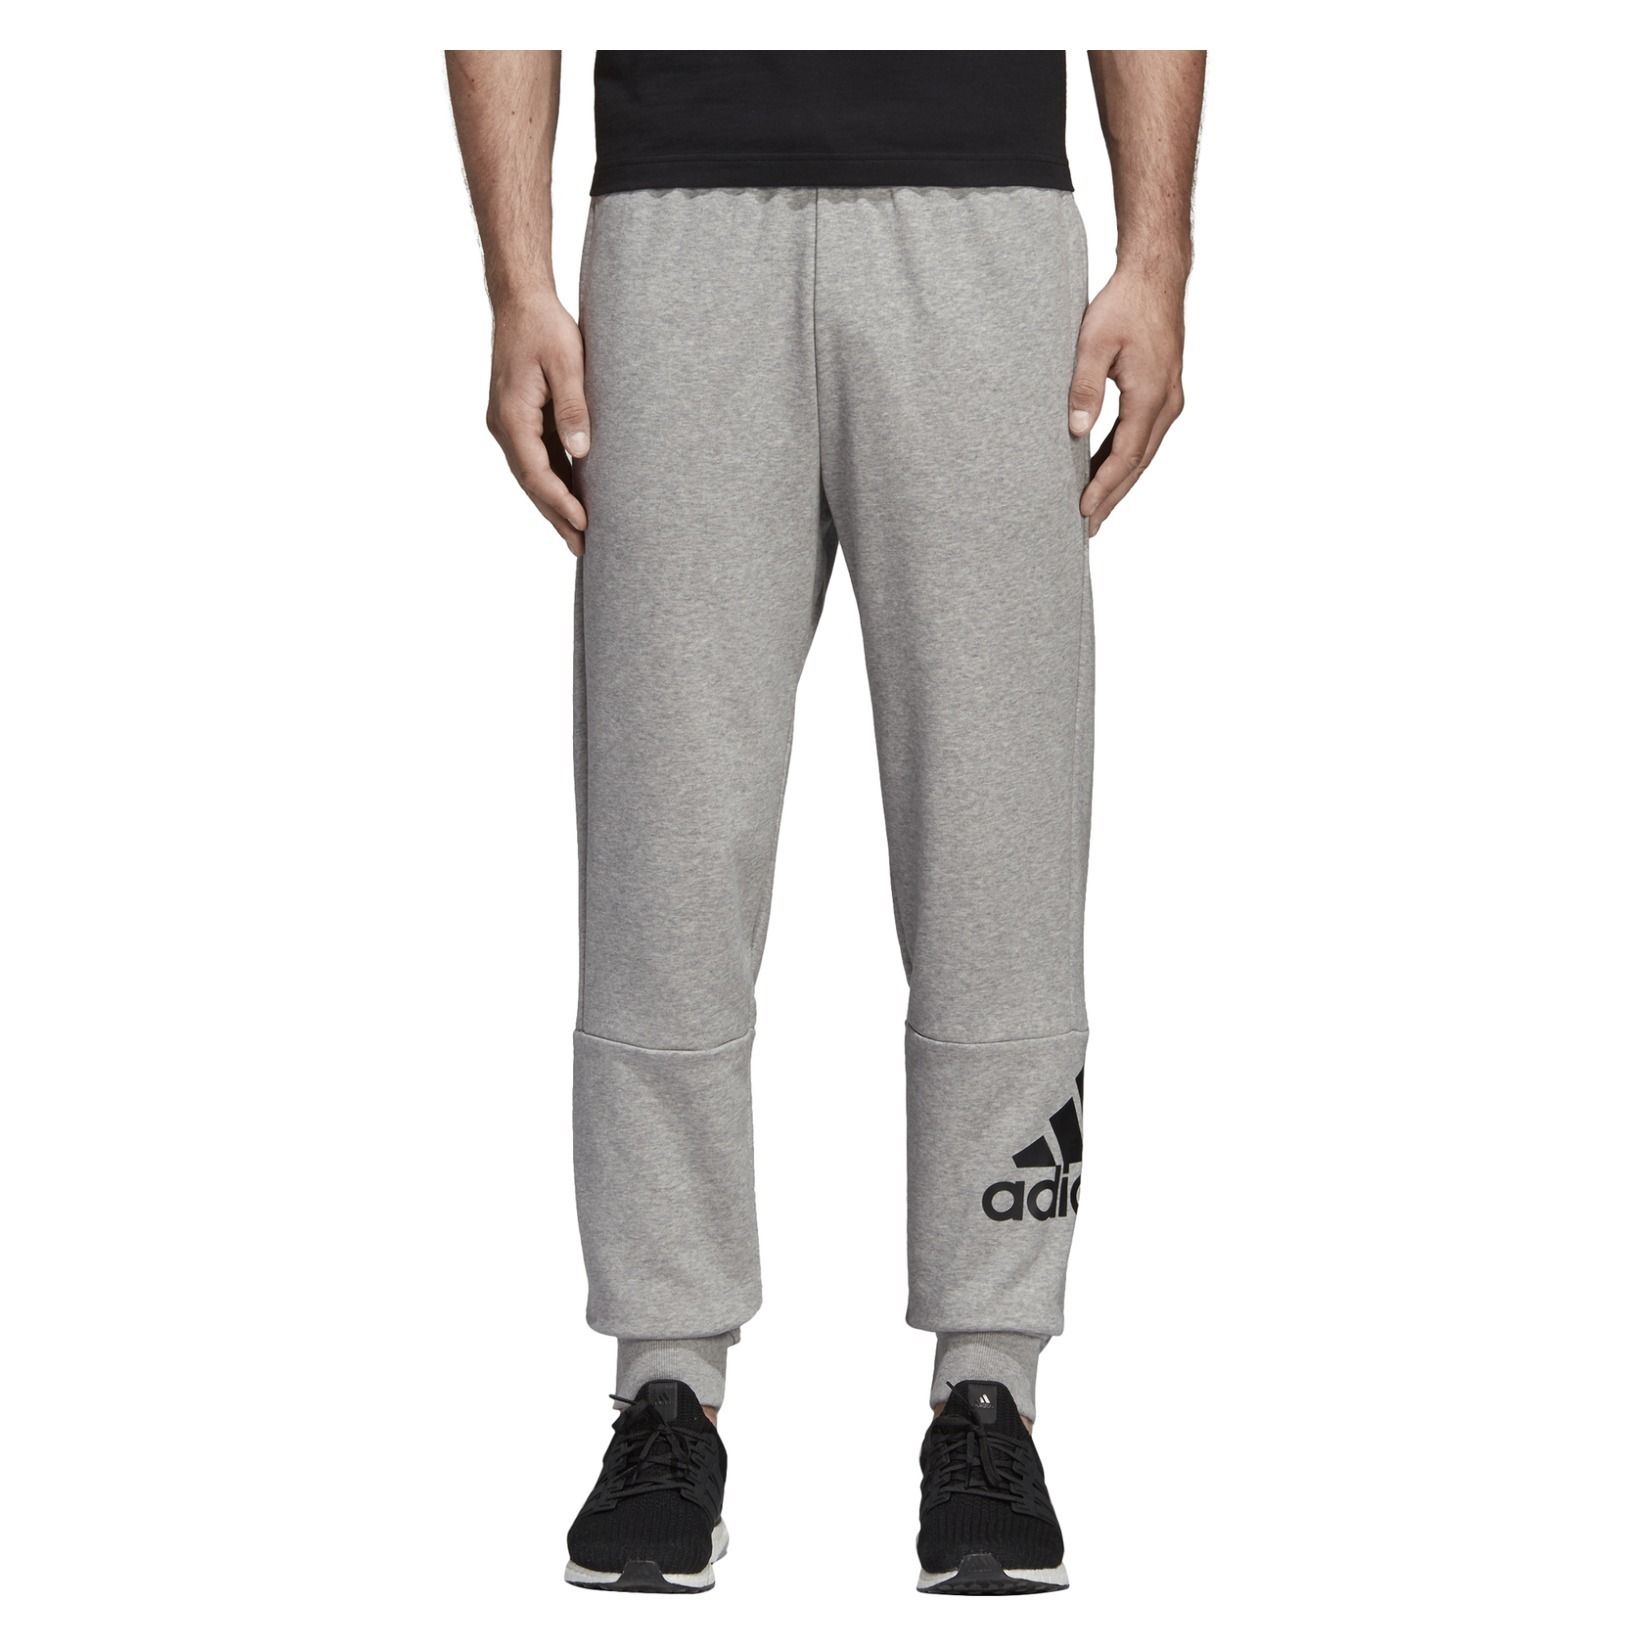 adidas Must Haves French Terry Badge Of Sport Pants - Kitlocker.com